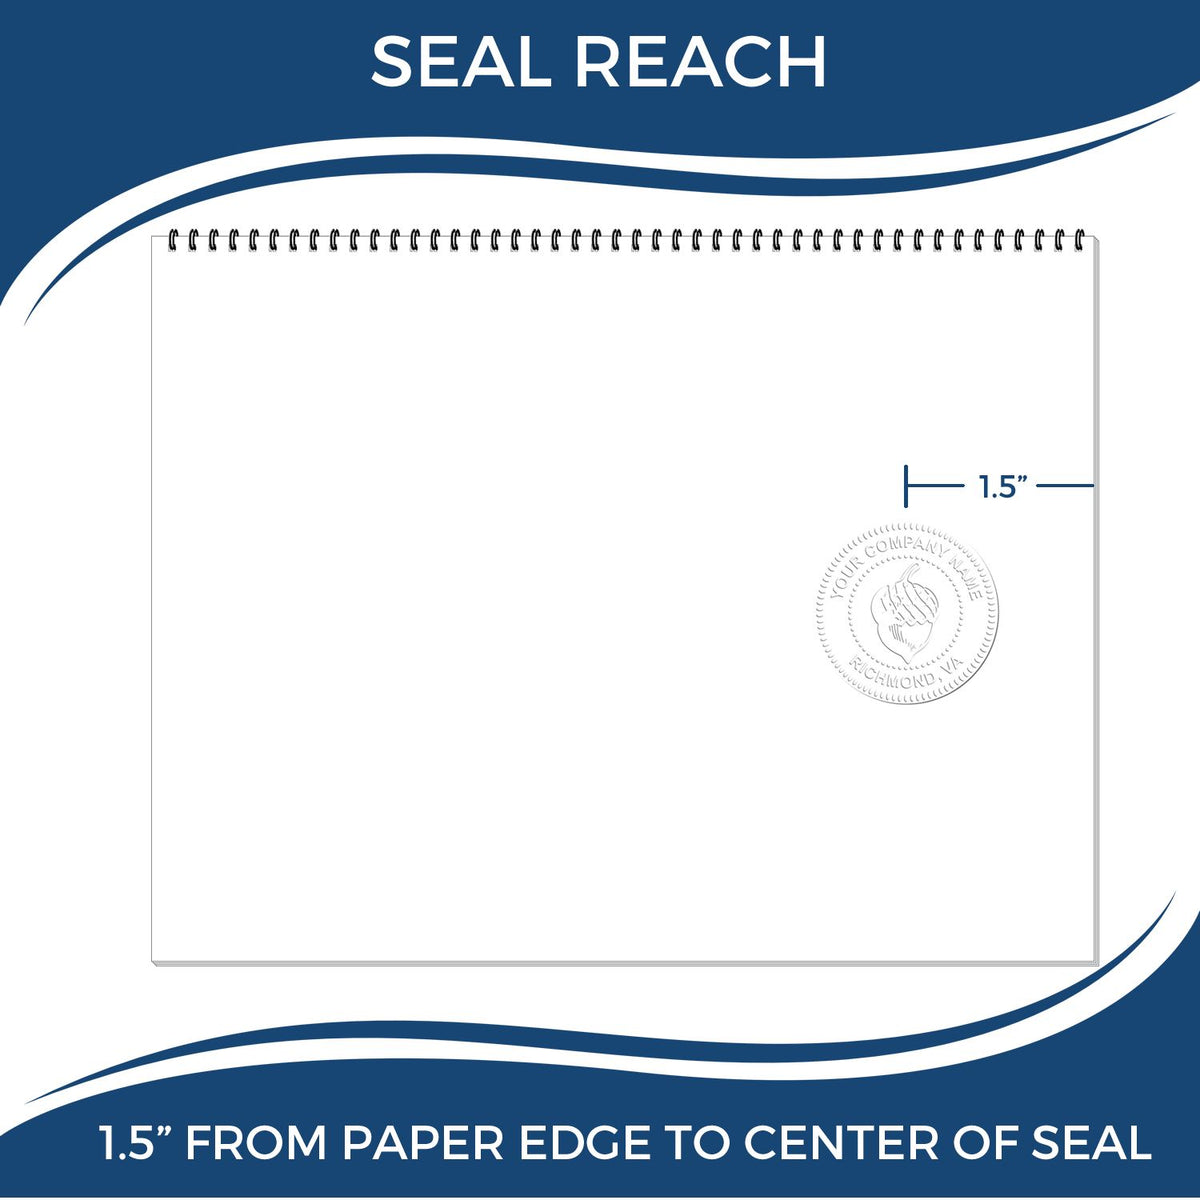 An infographic showing the seal reach which is represented by a ruler and a miniature seal image of the Hybrid Wyoming Landscape Architect Seal